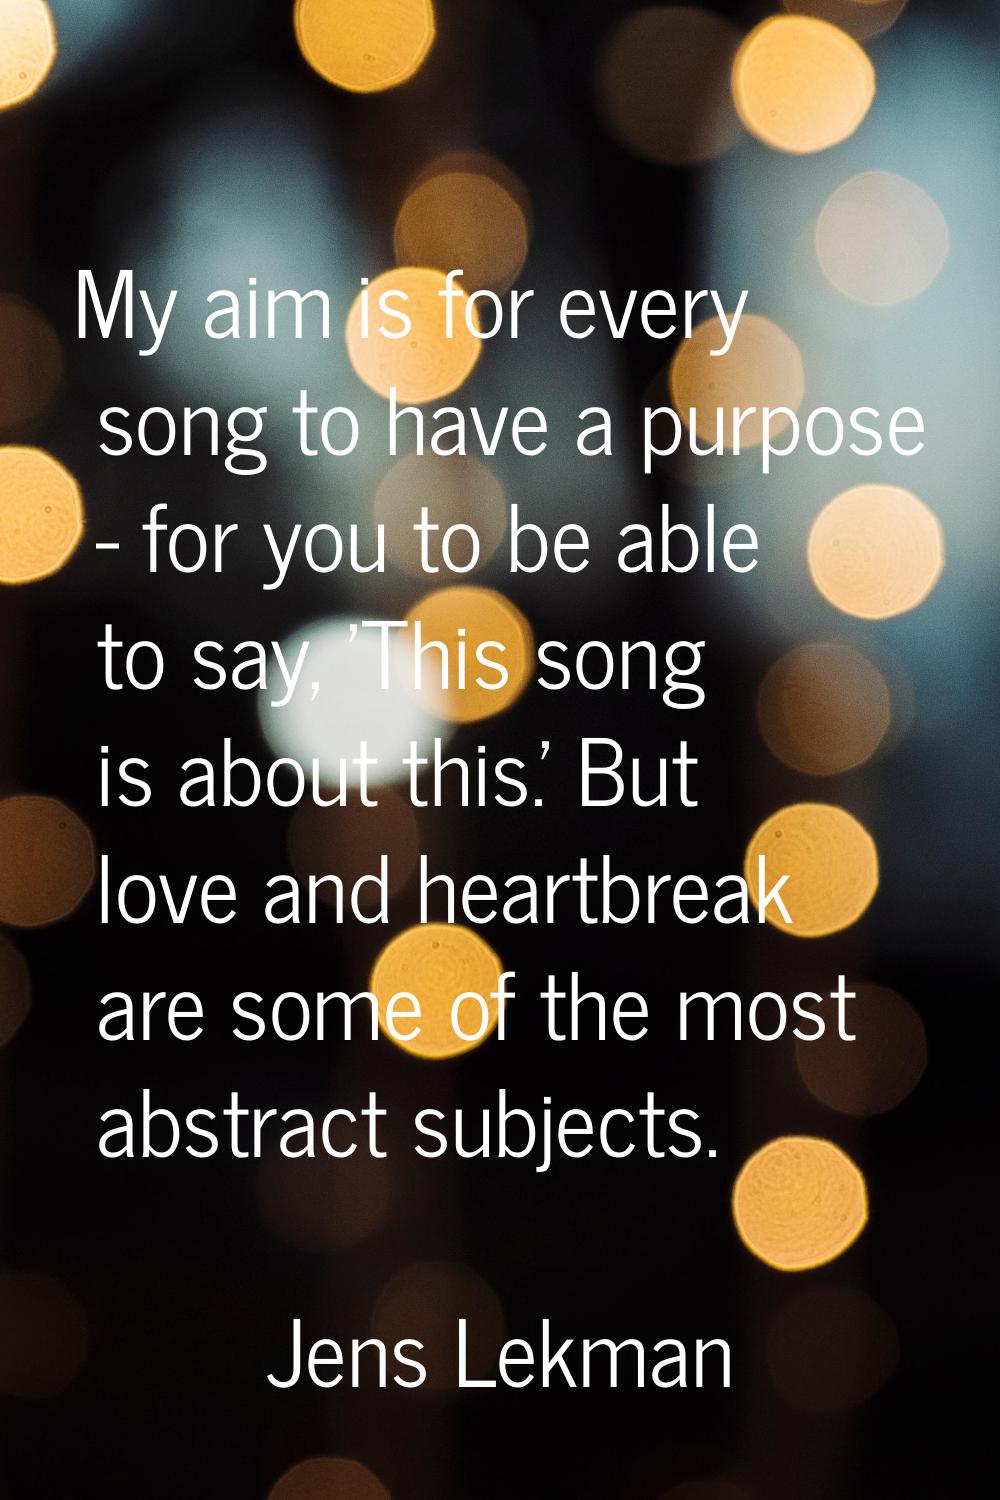 My aim is for every song to have a purpose - for you to be able to say, 'This song is about this.' 